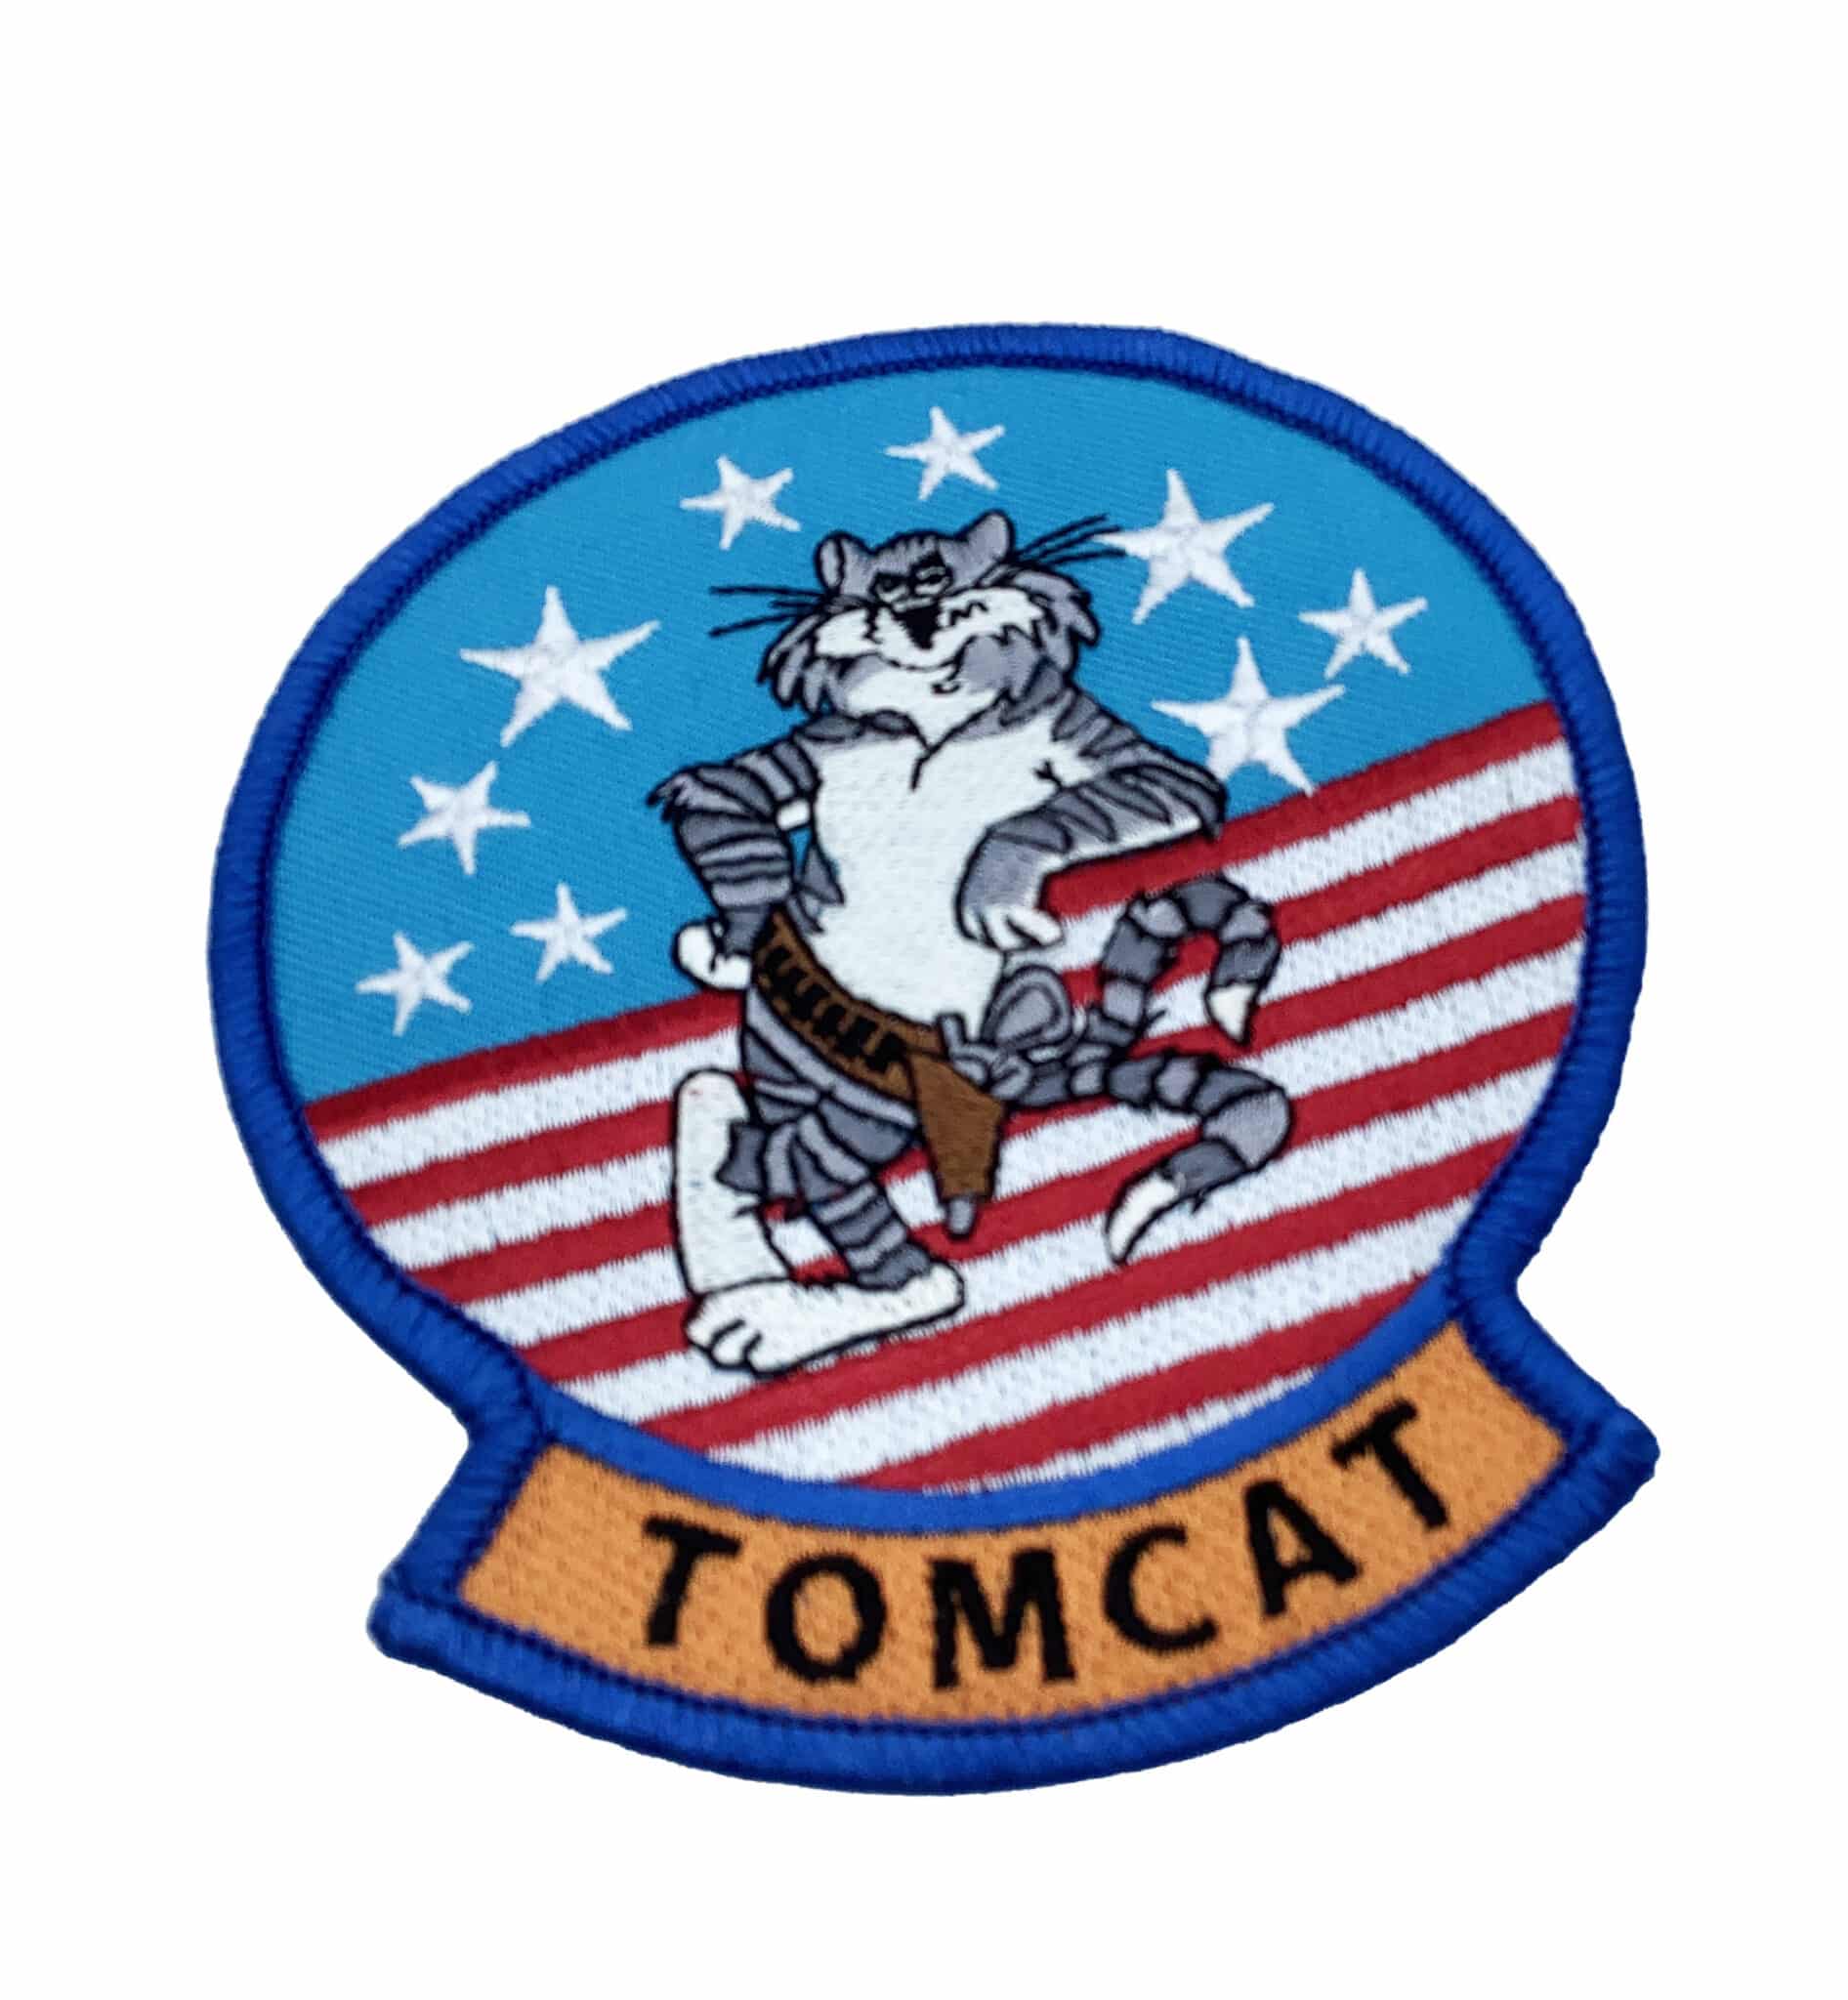 TOMCAT Patch – Plastic Backing